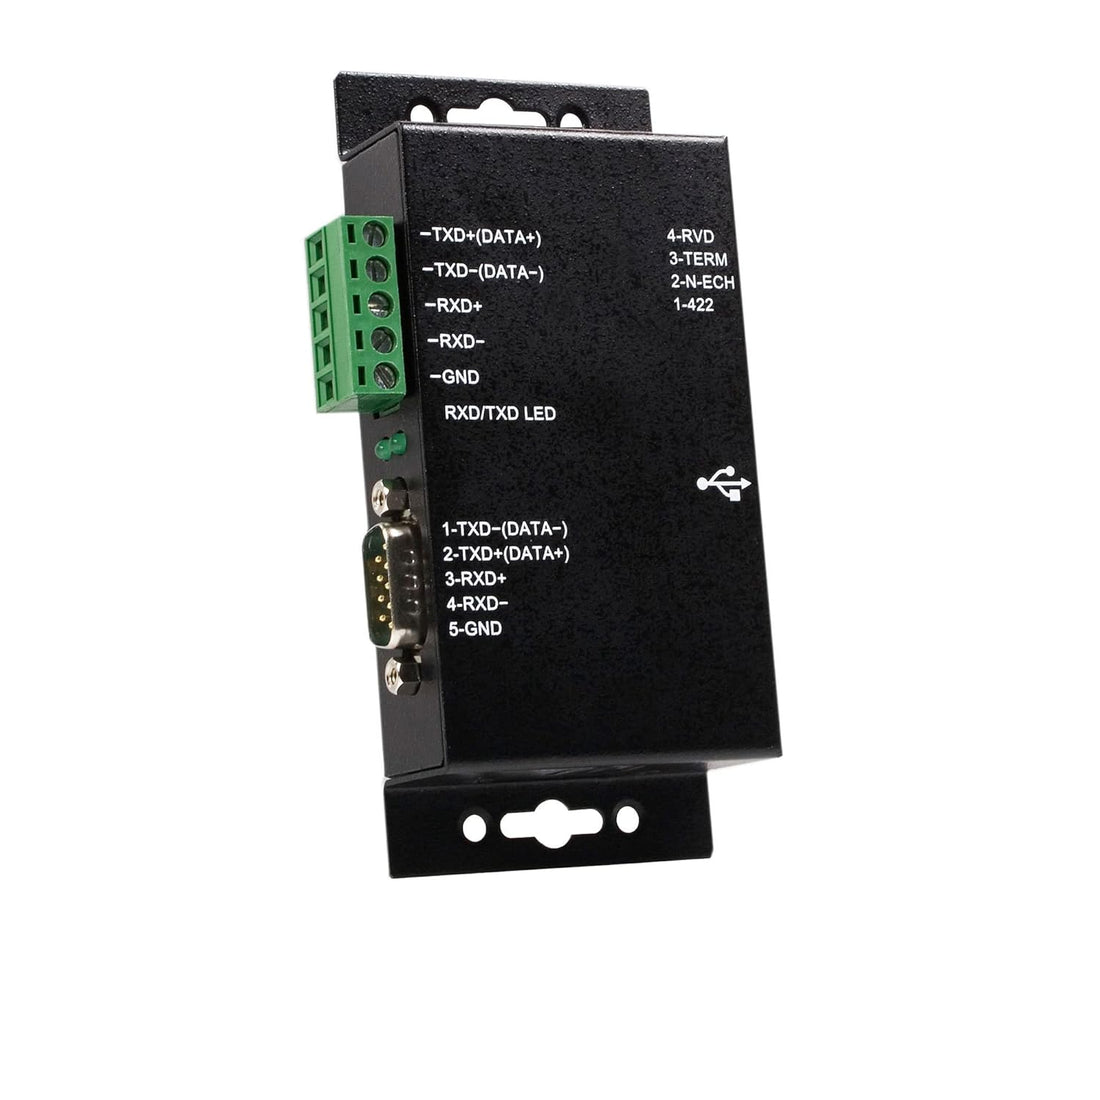 StarTech.com 1 Port Metal Industrial USB to RS422/RS485 Serial Adapter with Isolation ICUSB422IS (Black)